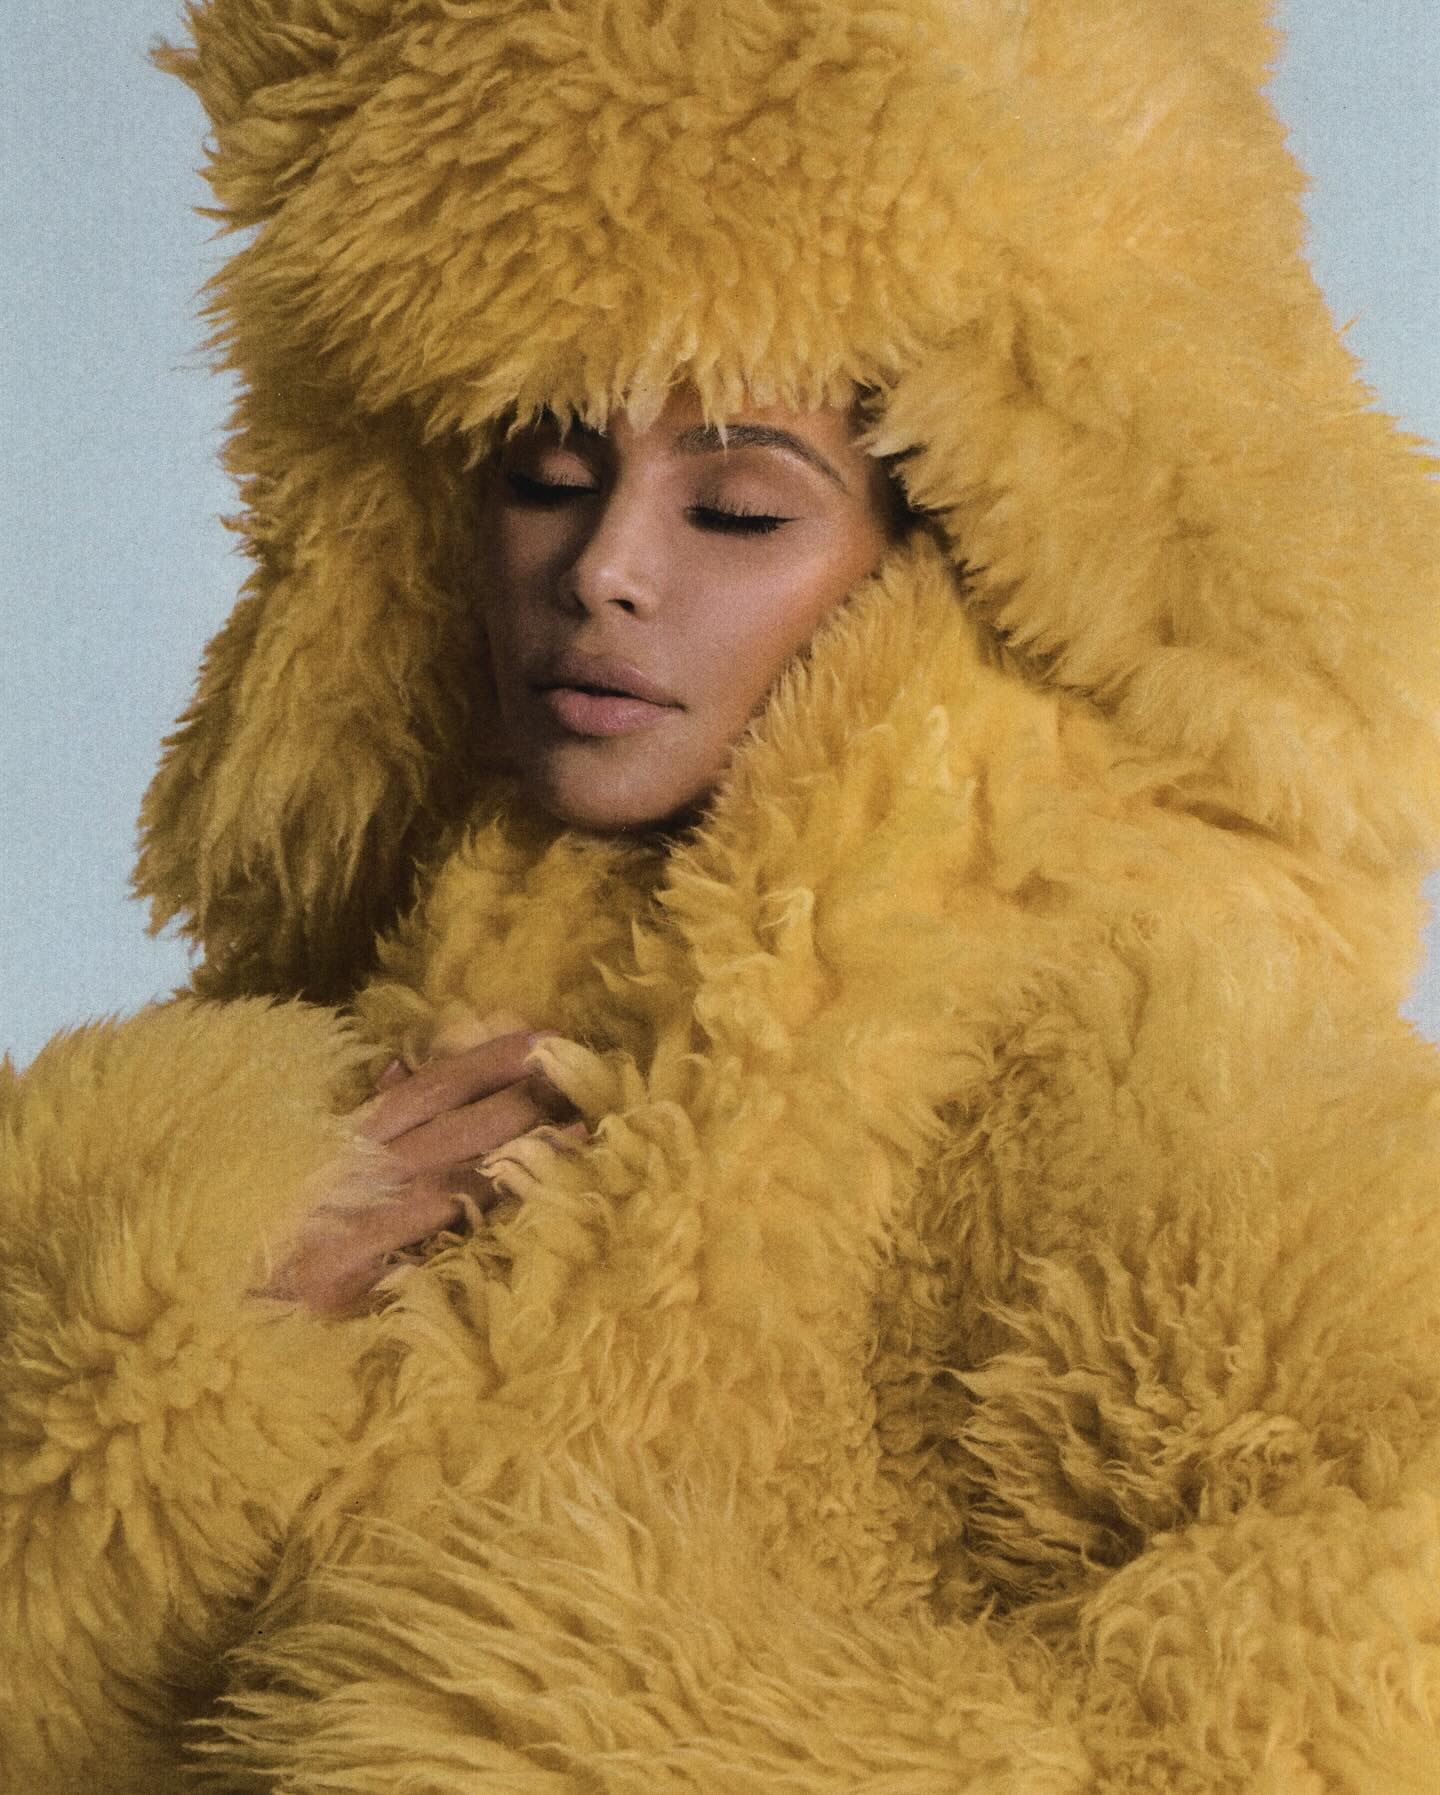 The star shared photos of herself in the furry ensemble on Tuesday